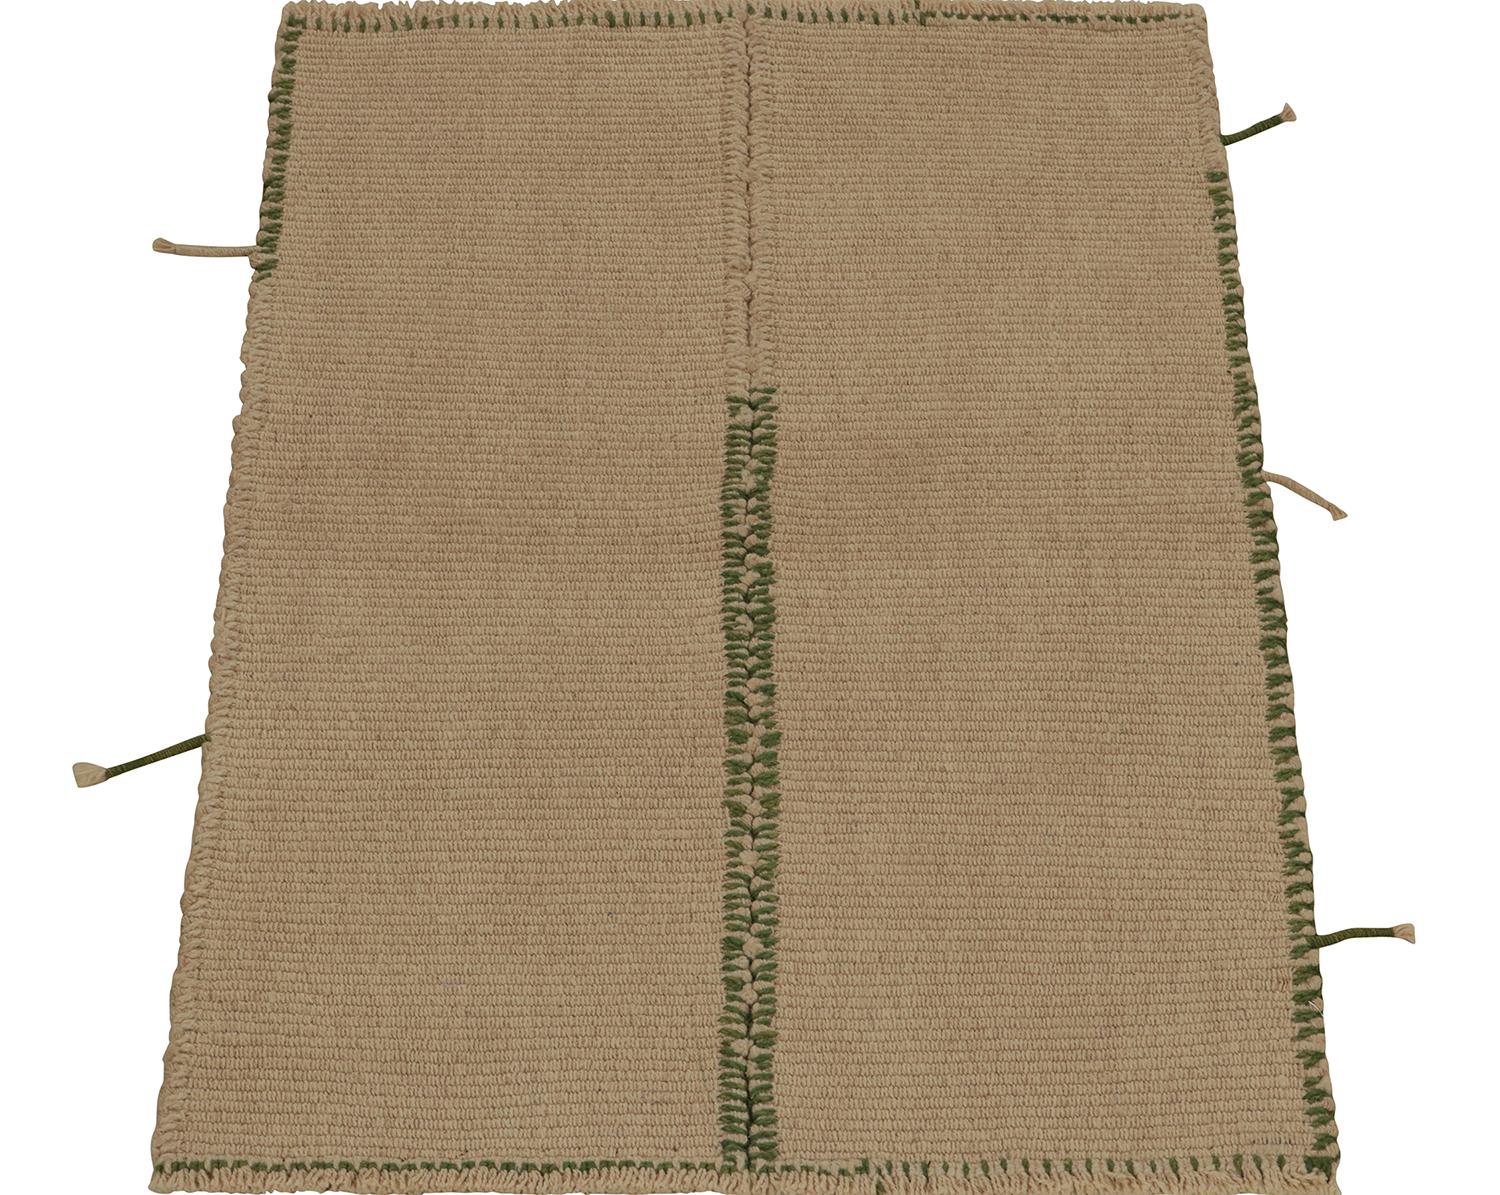 Modern Rug & Kilim’s Contemporary Kilim in Beige-Brown with Green Accents For Sale